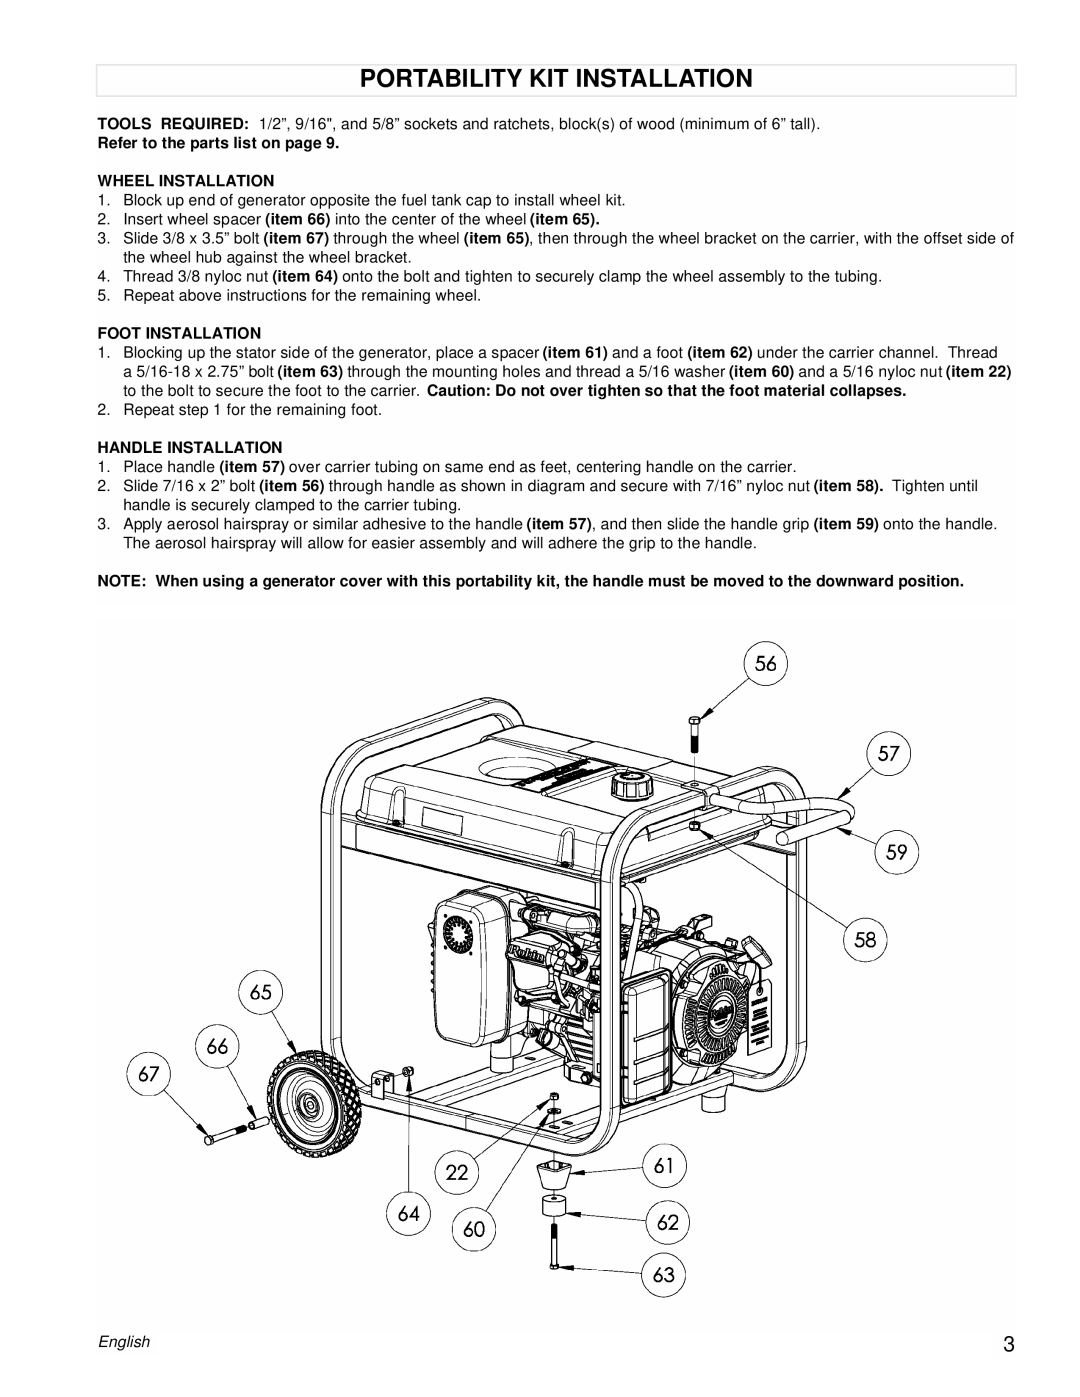 Powermate PM0435002 Portability Kit Installation, Refer to the parts list on page, Wheel Installation, Foot Installation 